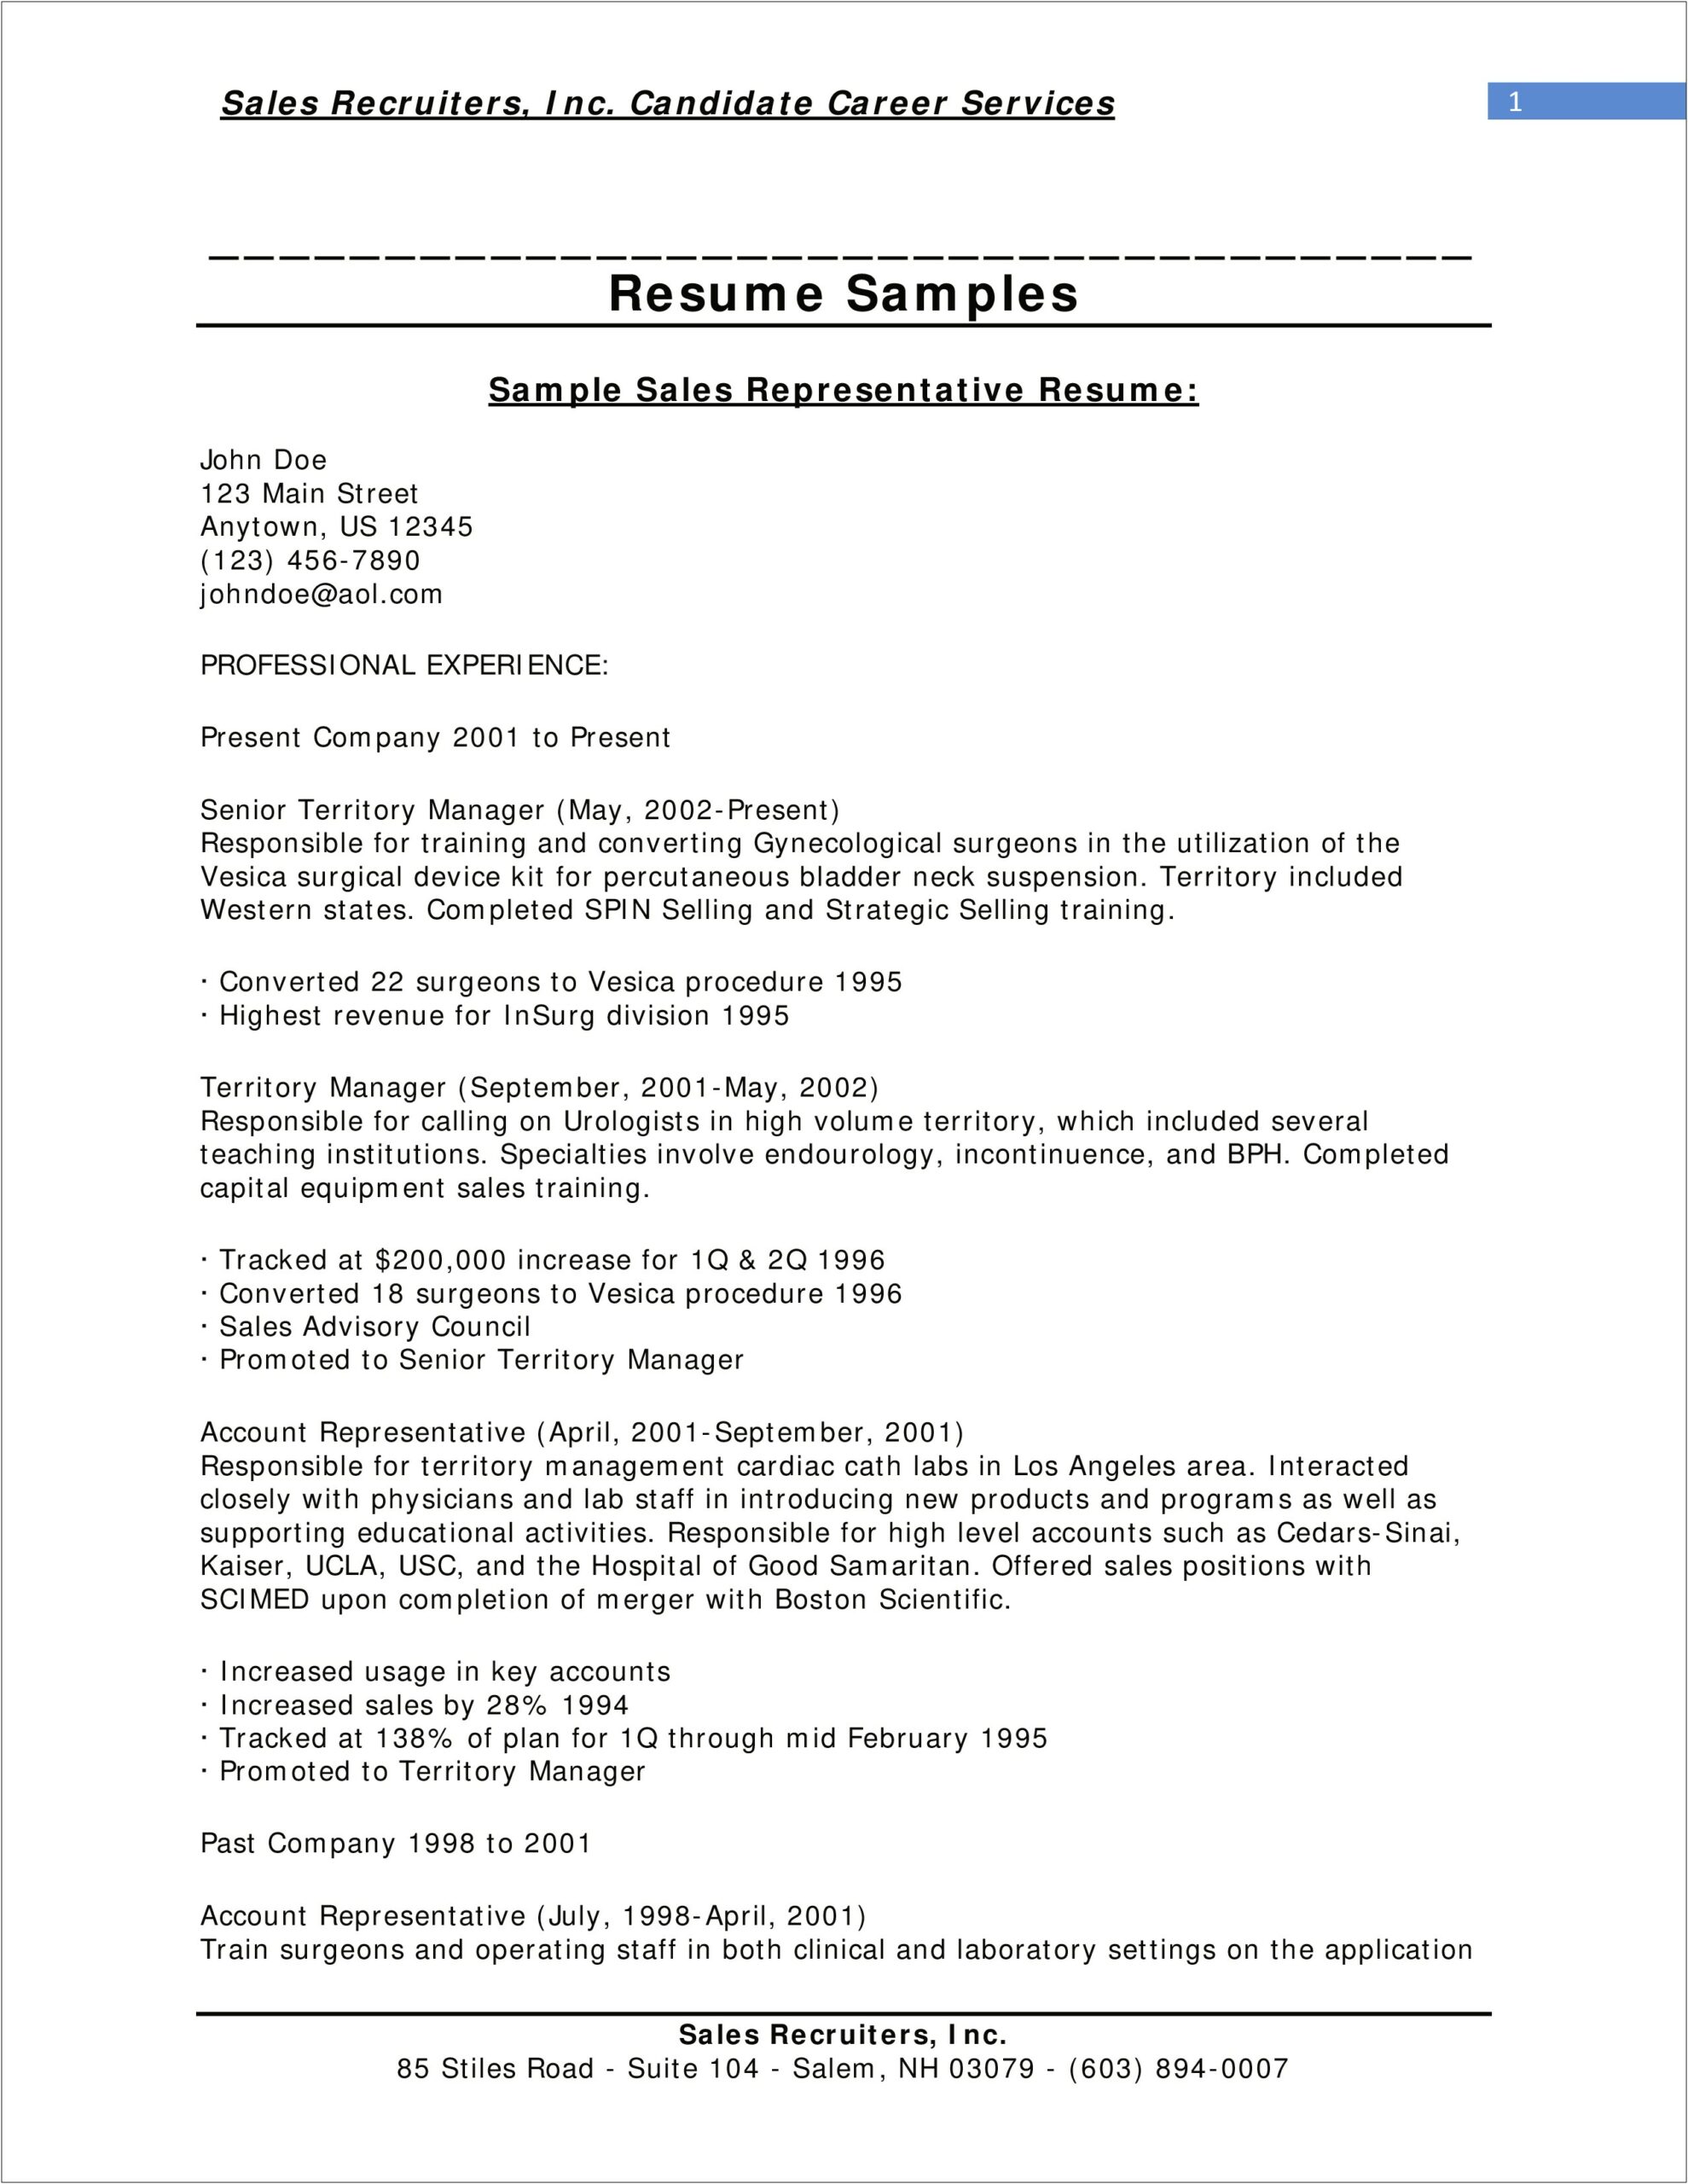 Resume For Sales Representative With Experience